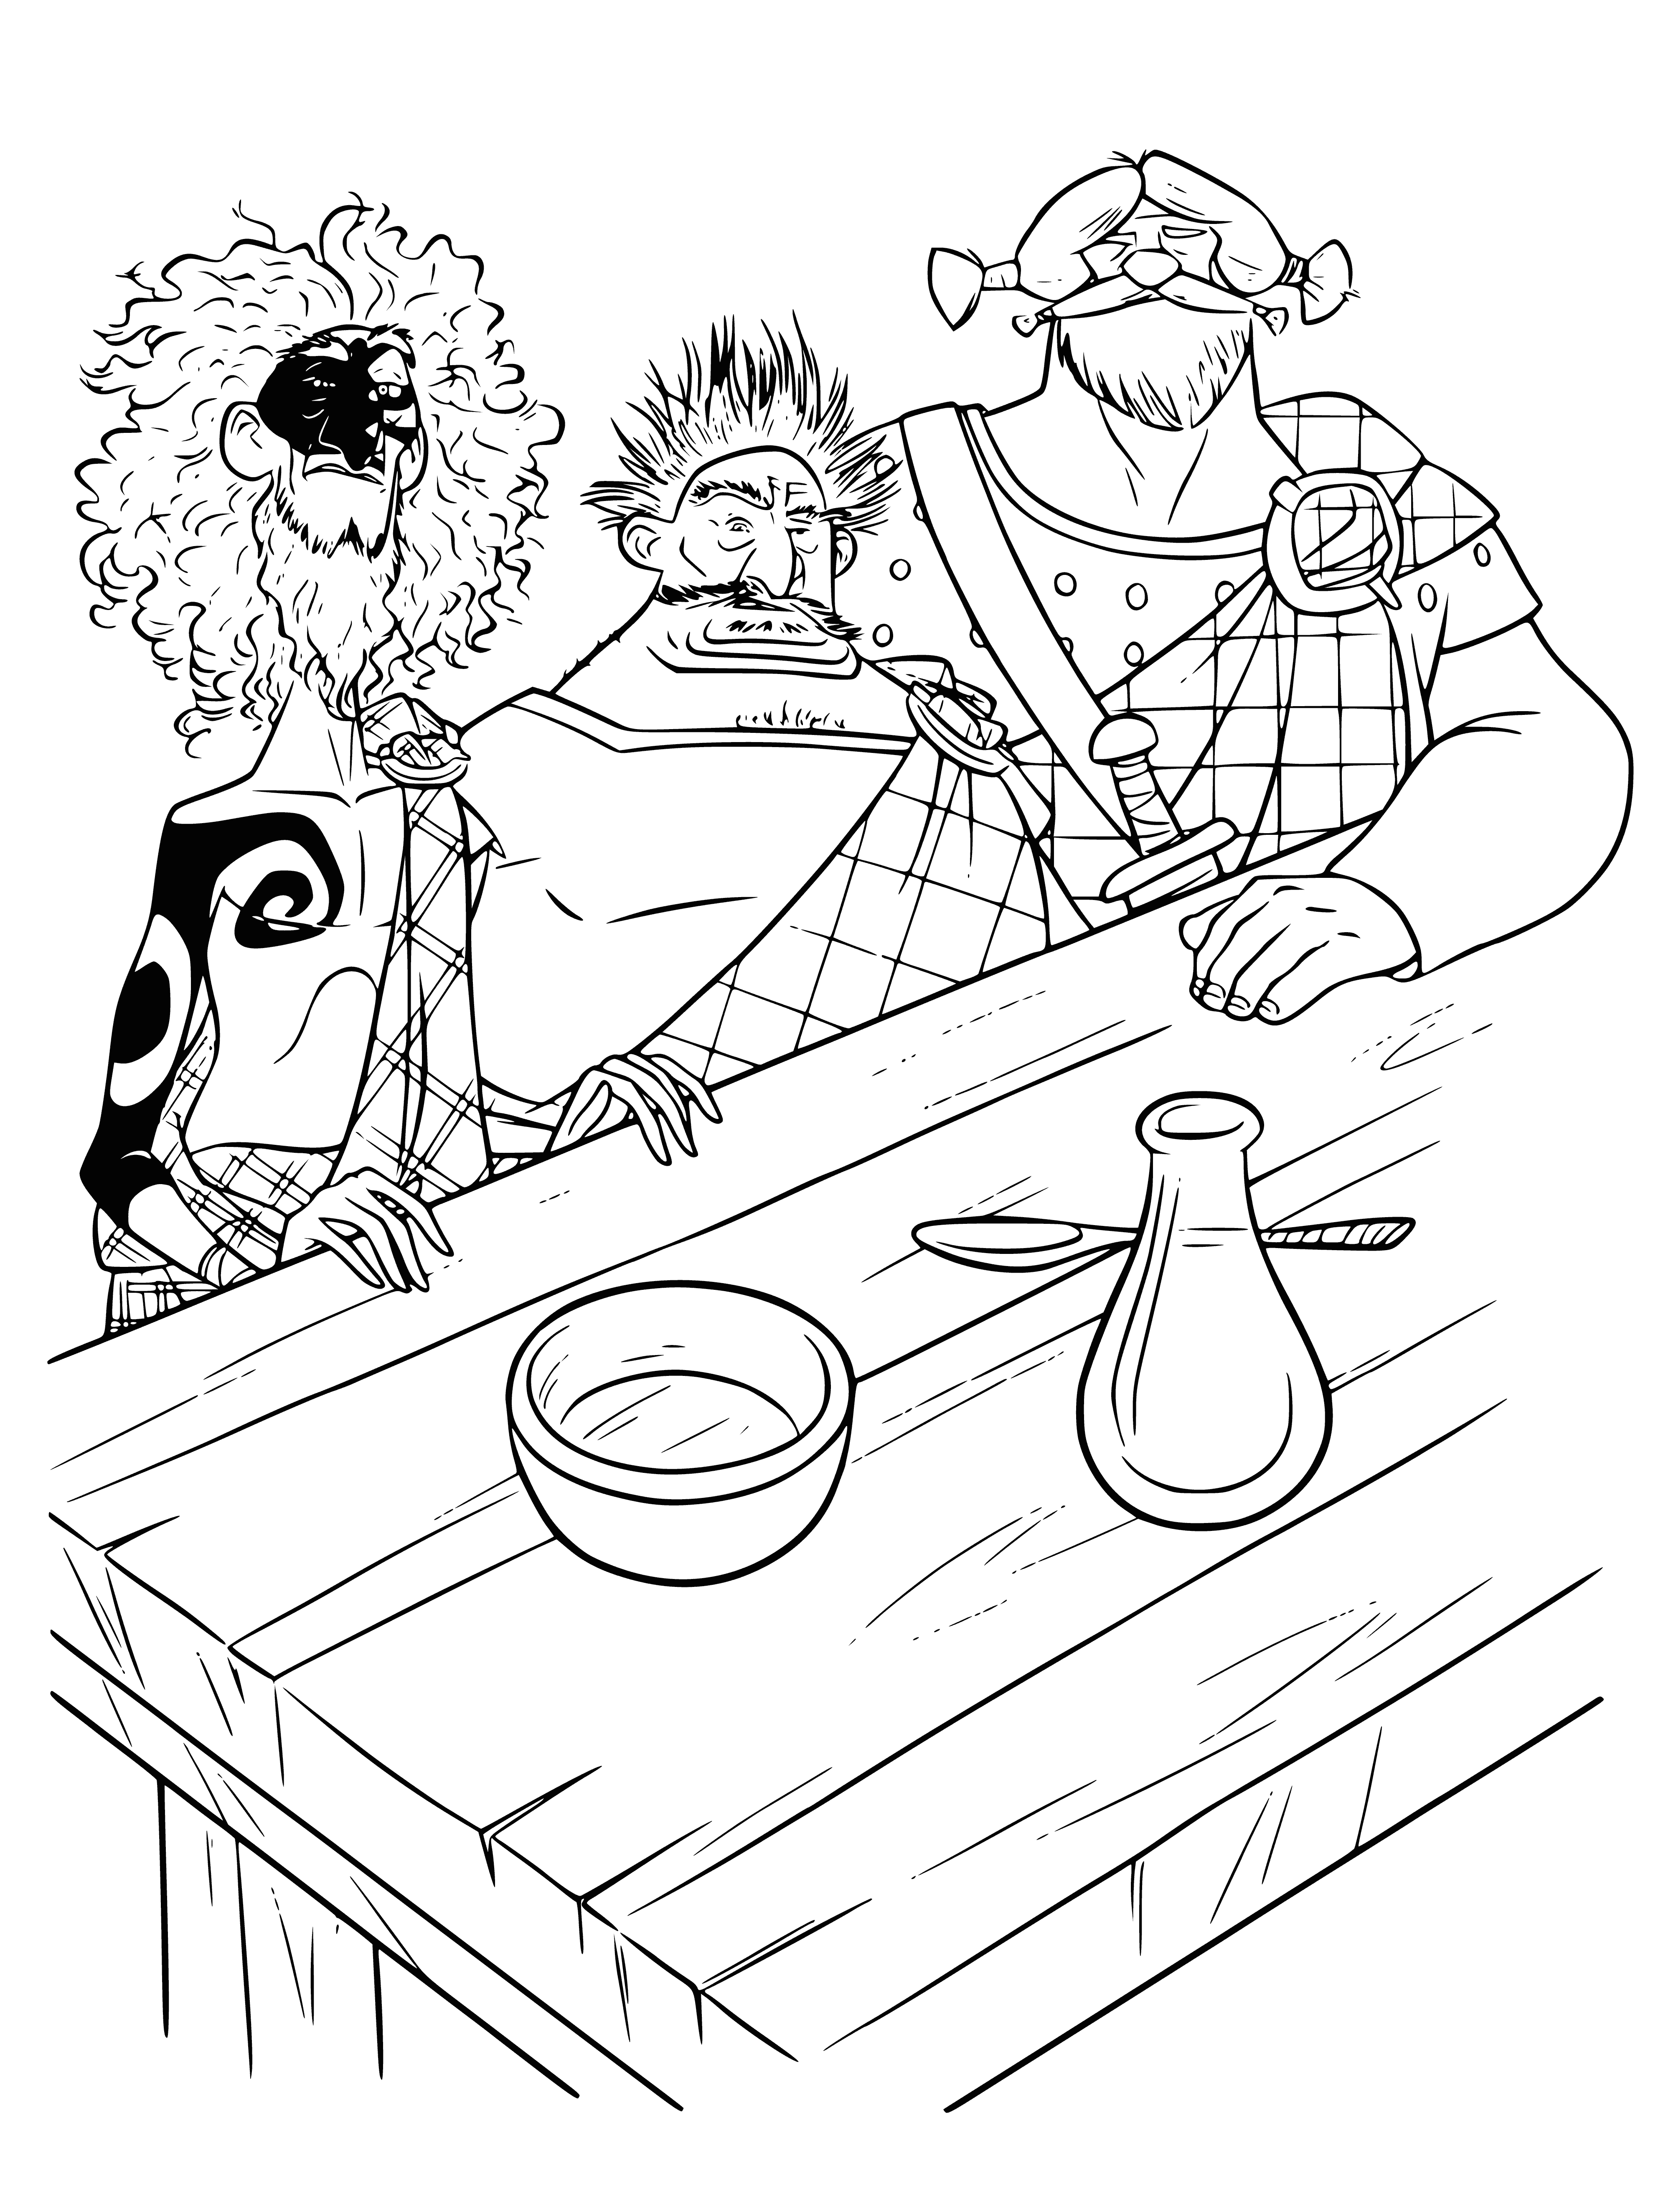 coloring page: Brave Scottish Lords around a table, discussing a battle - determination and courage evident in their faces, ready to fight and be a force to reckon with. #ScottishPride